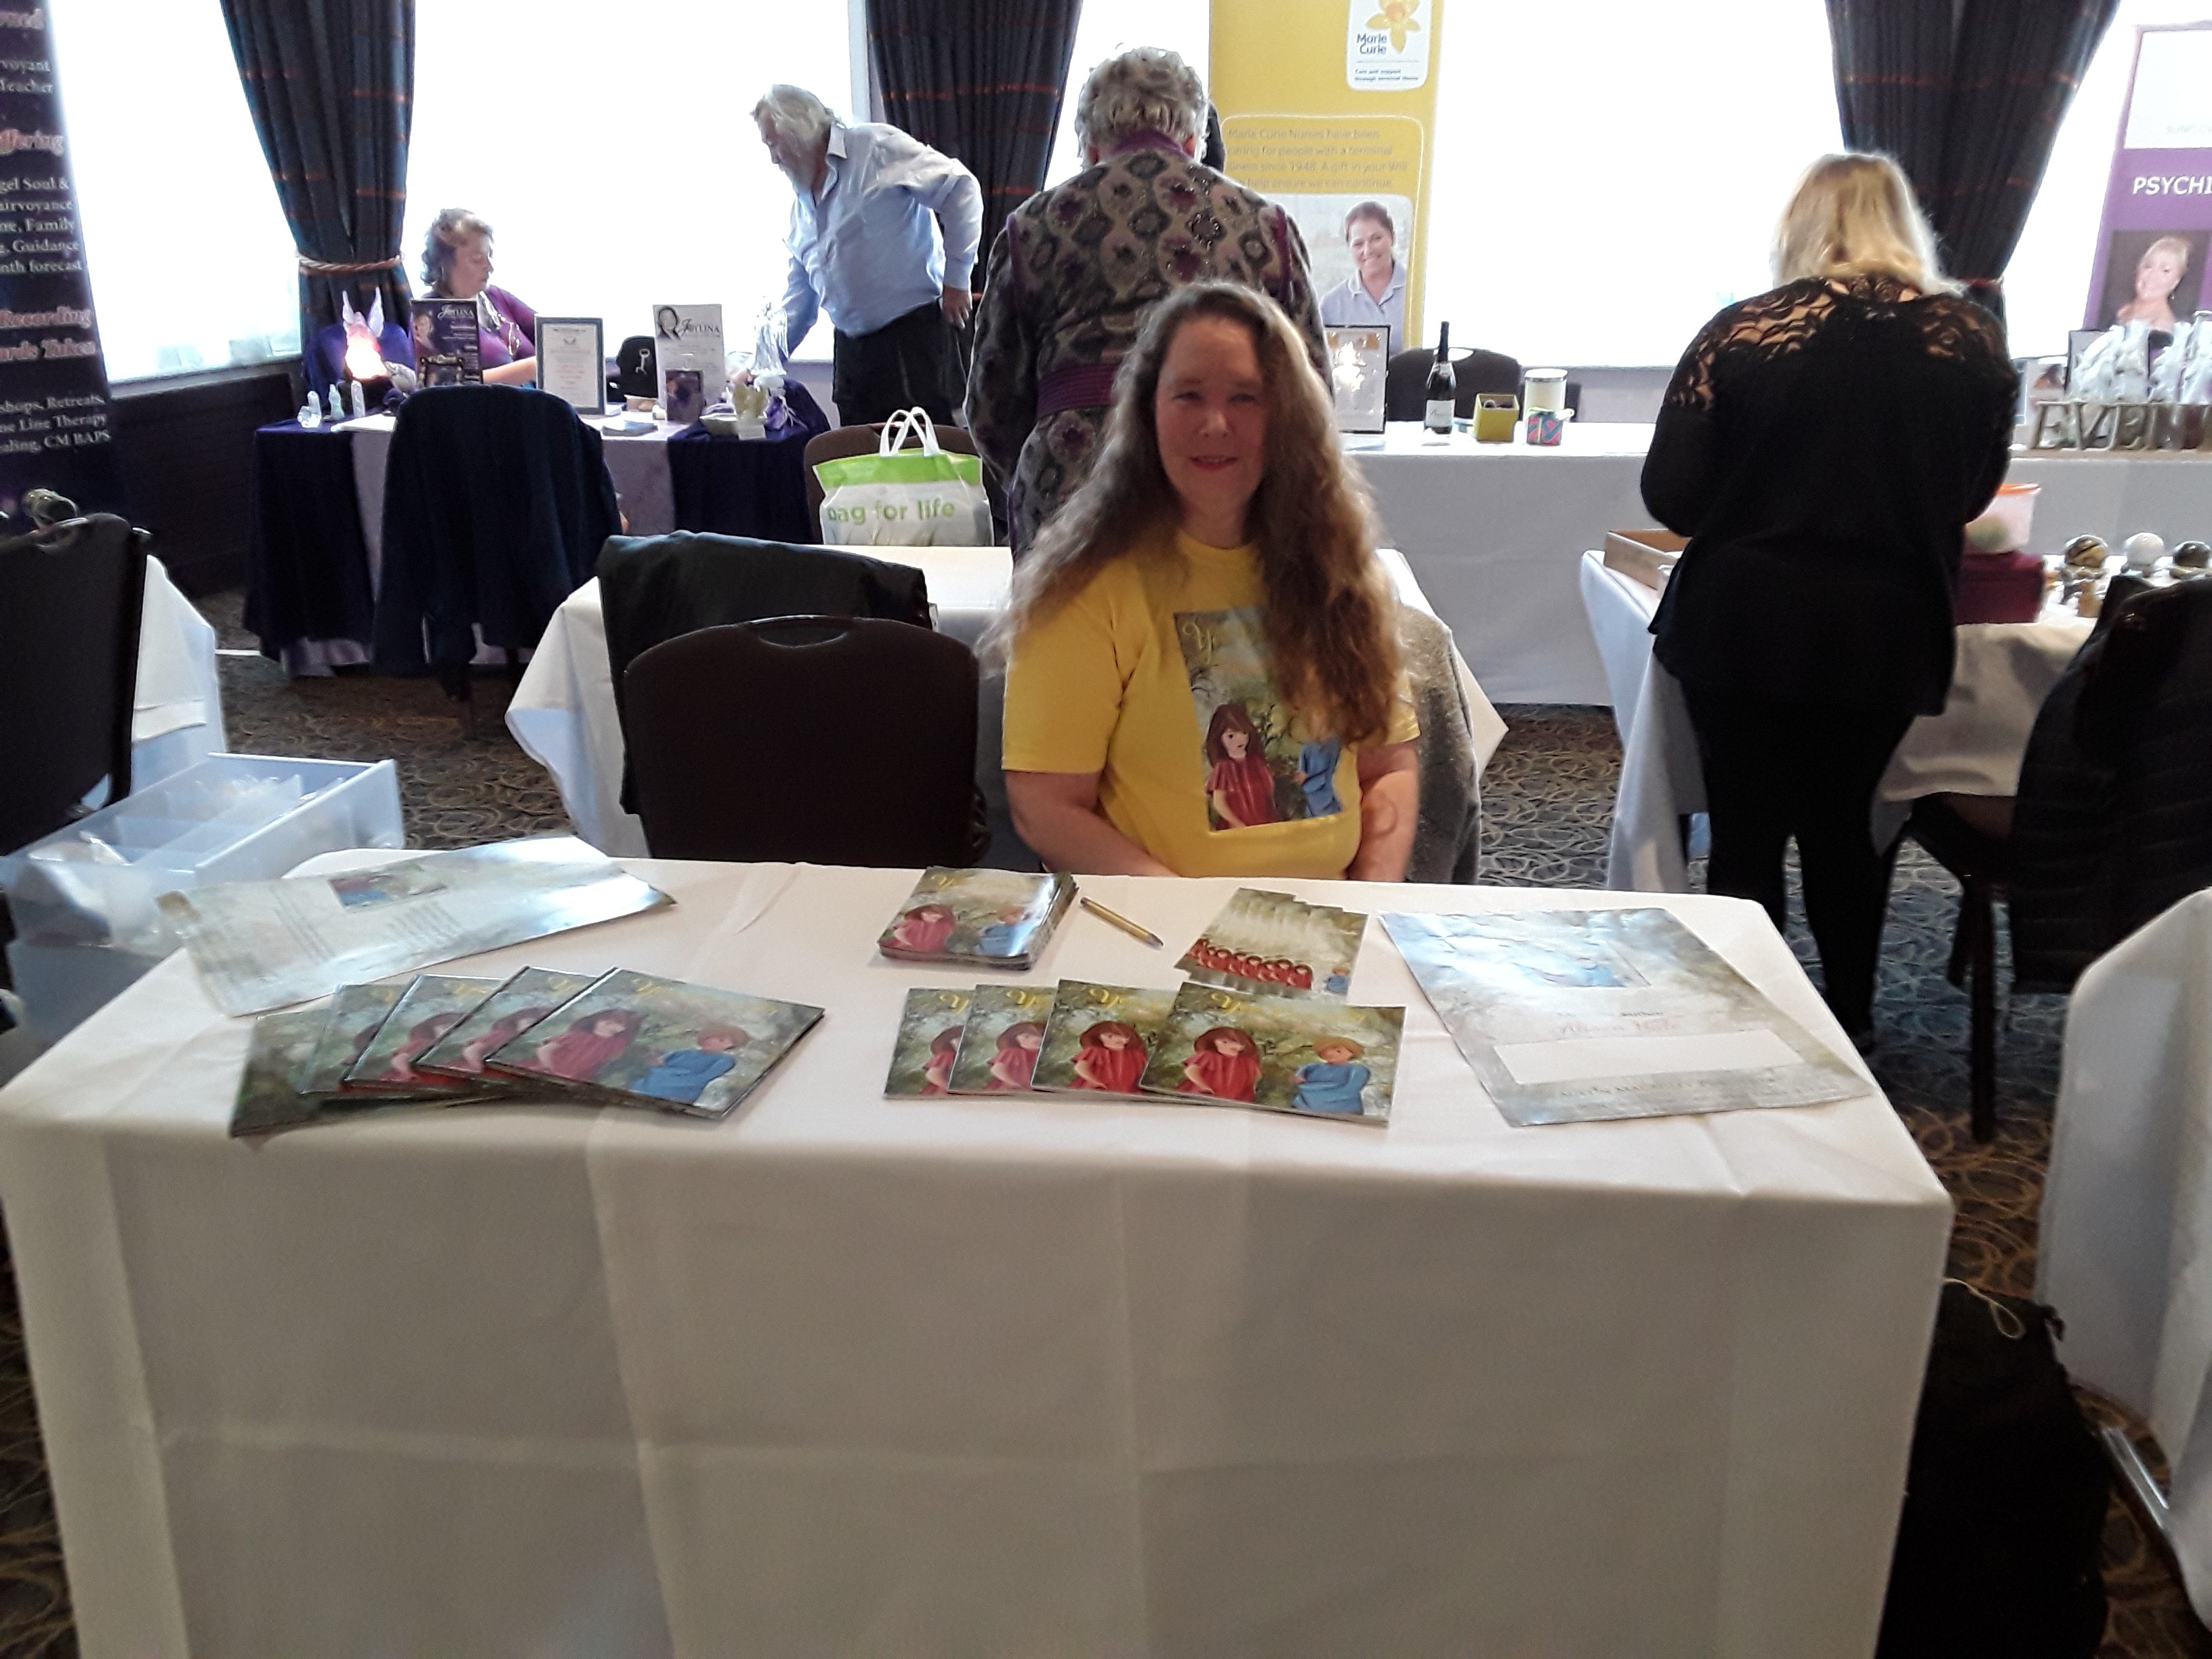 Author Alison Hale was at the Westcliff Hotel in Bournemouth to attend an event